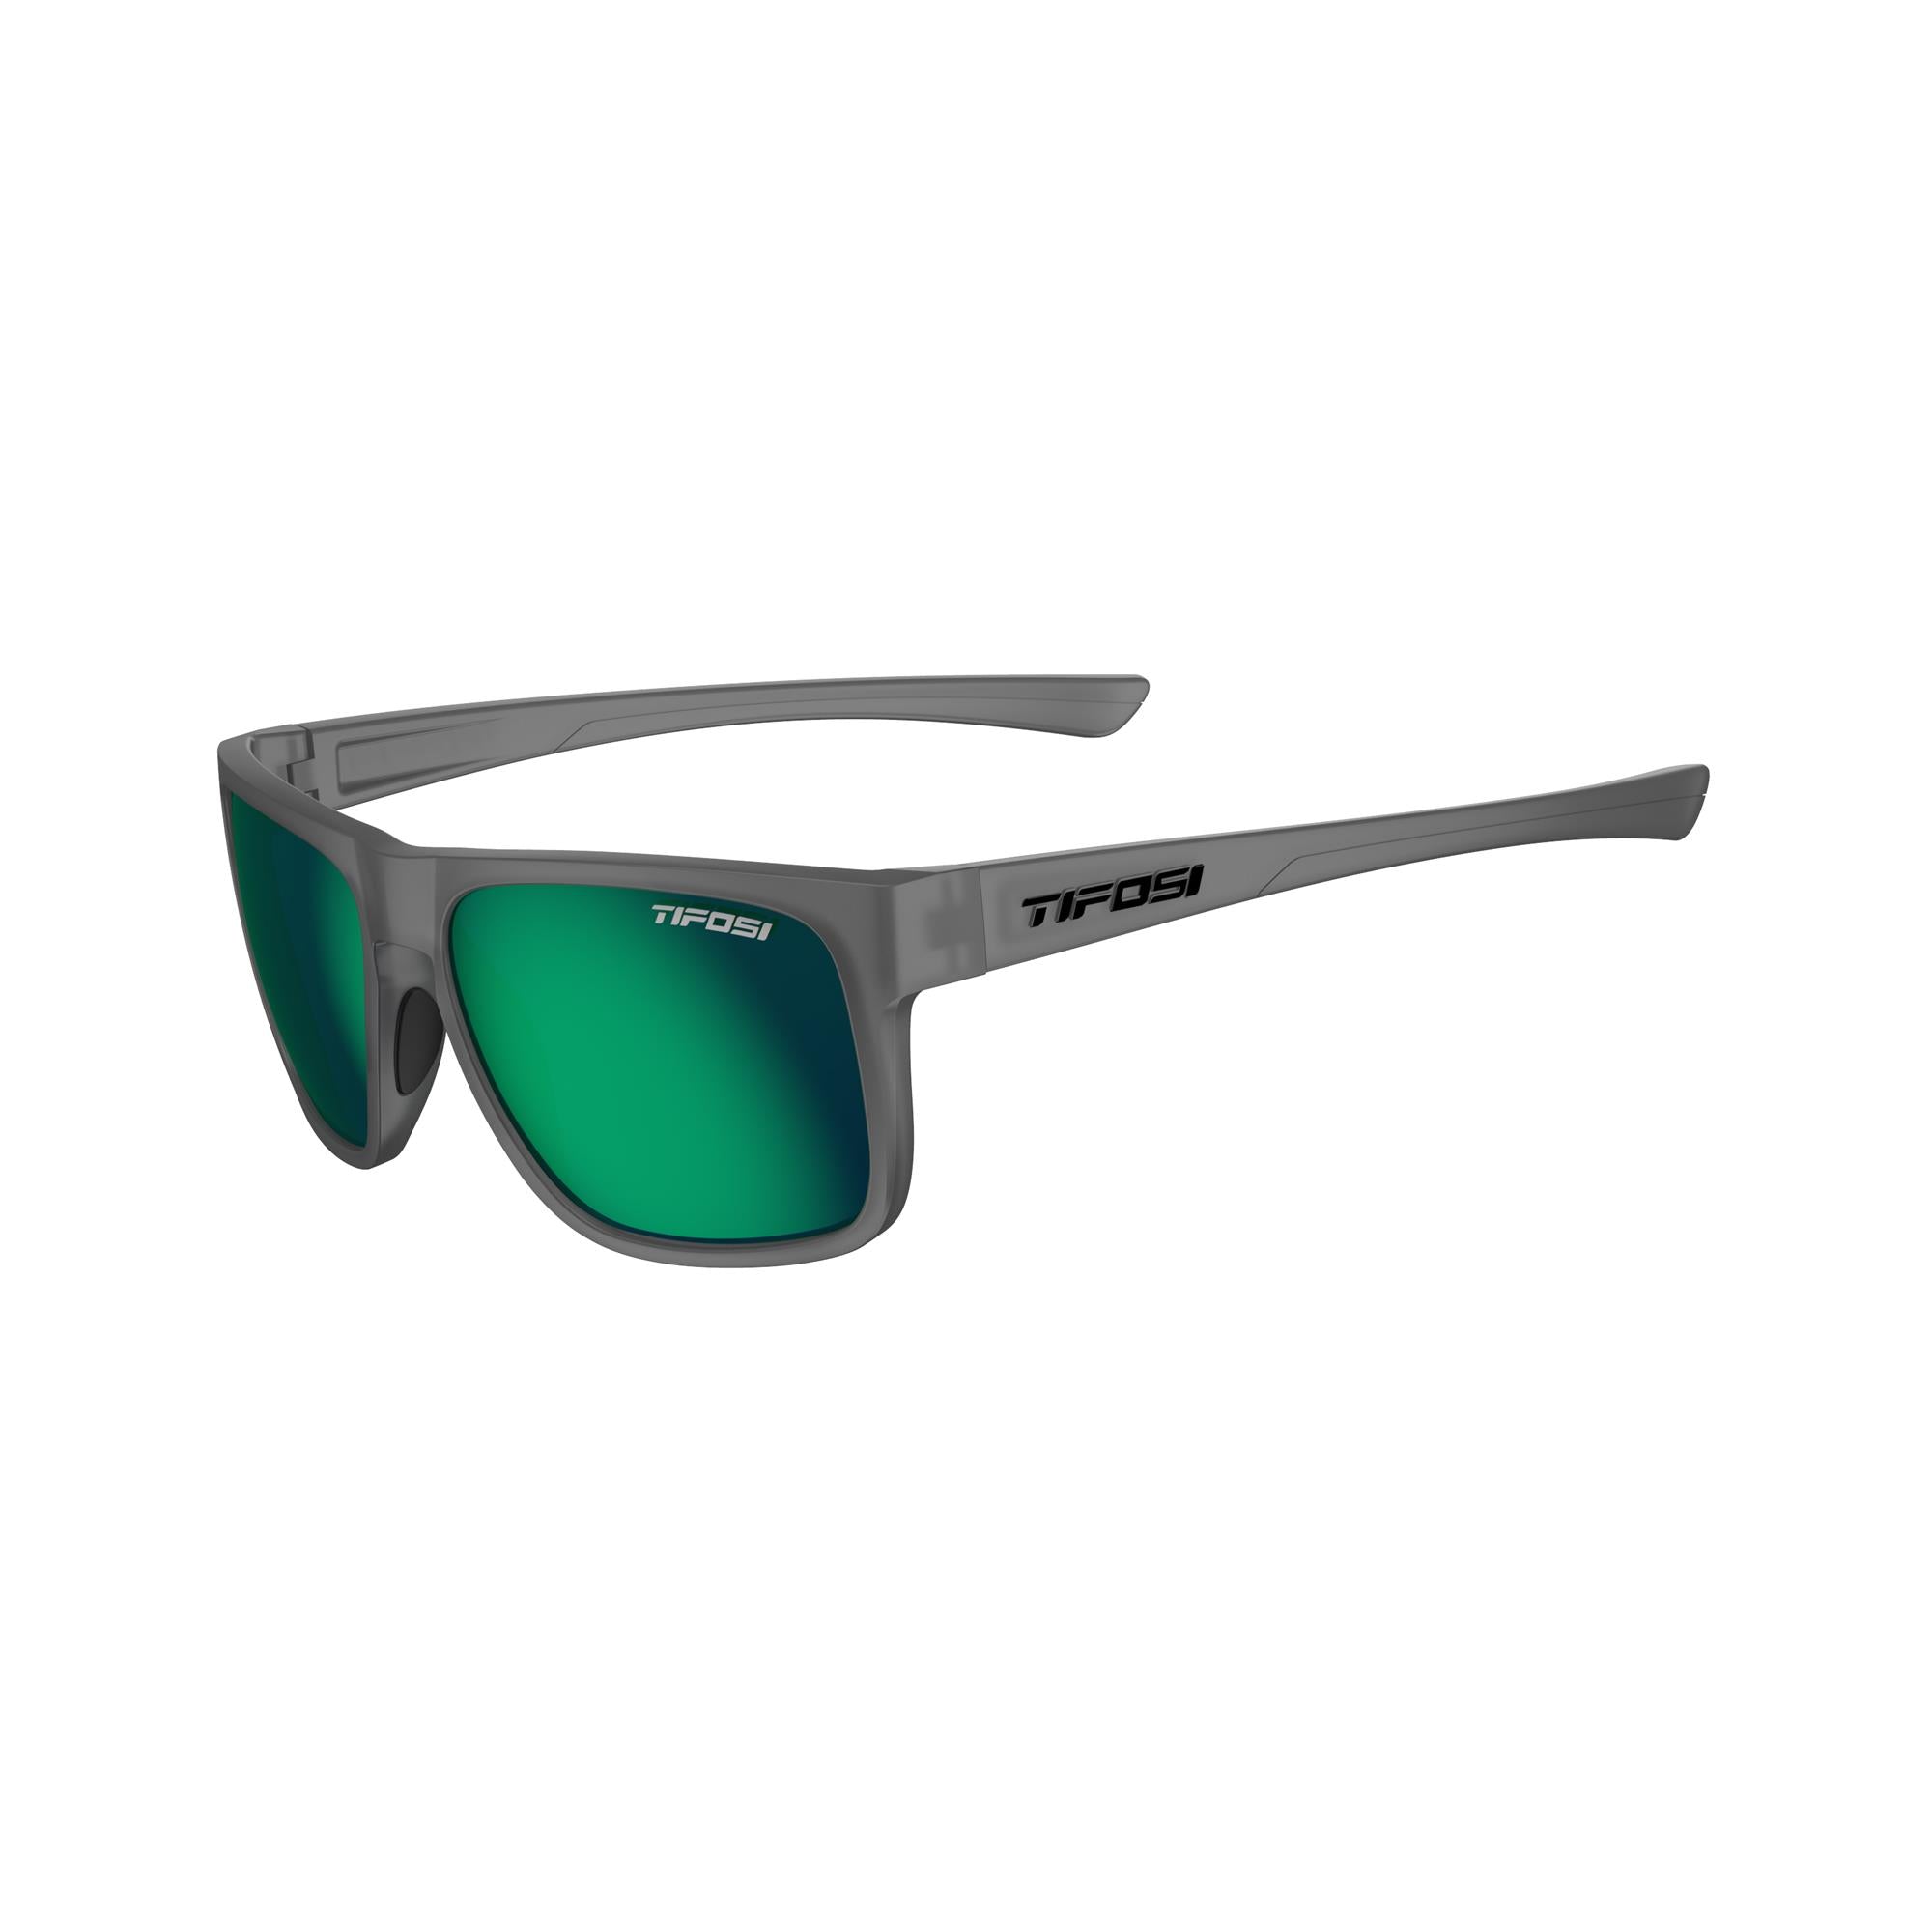 Lifestyle Sunglasses | Sporty Style For Everyday Use | Tifosi